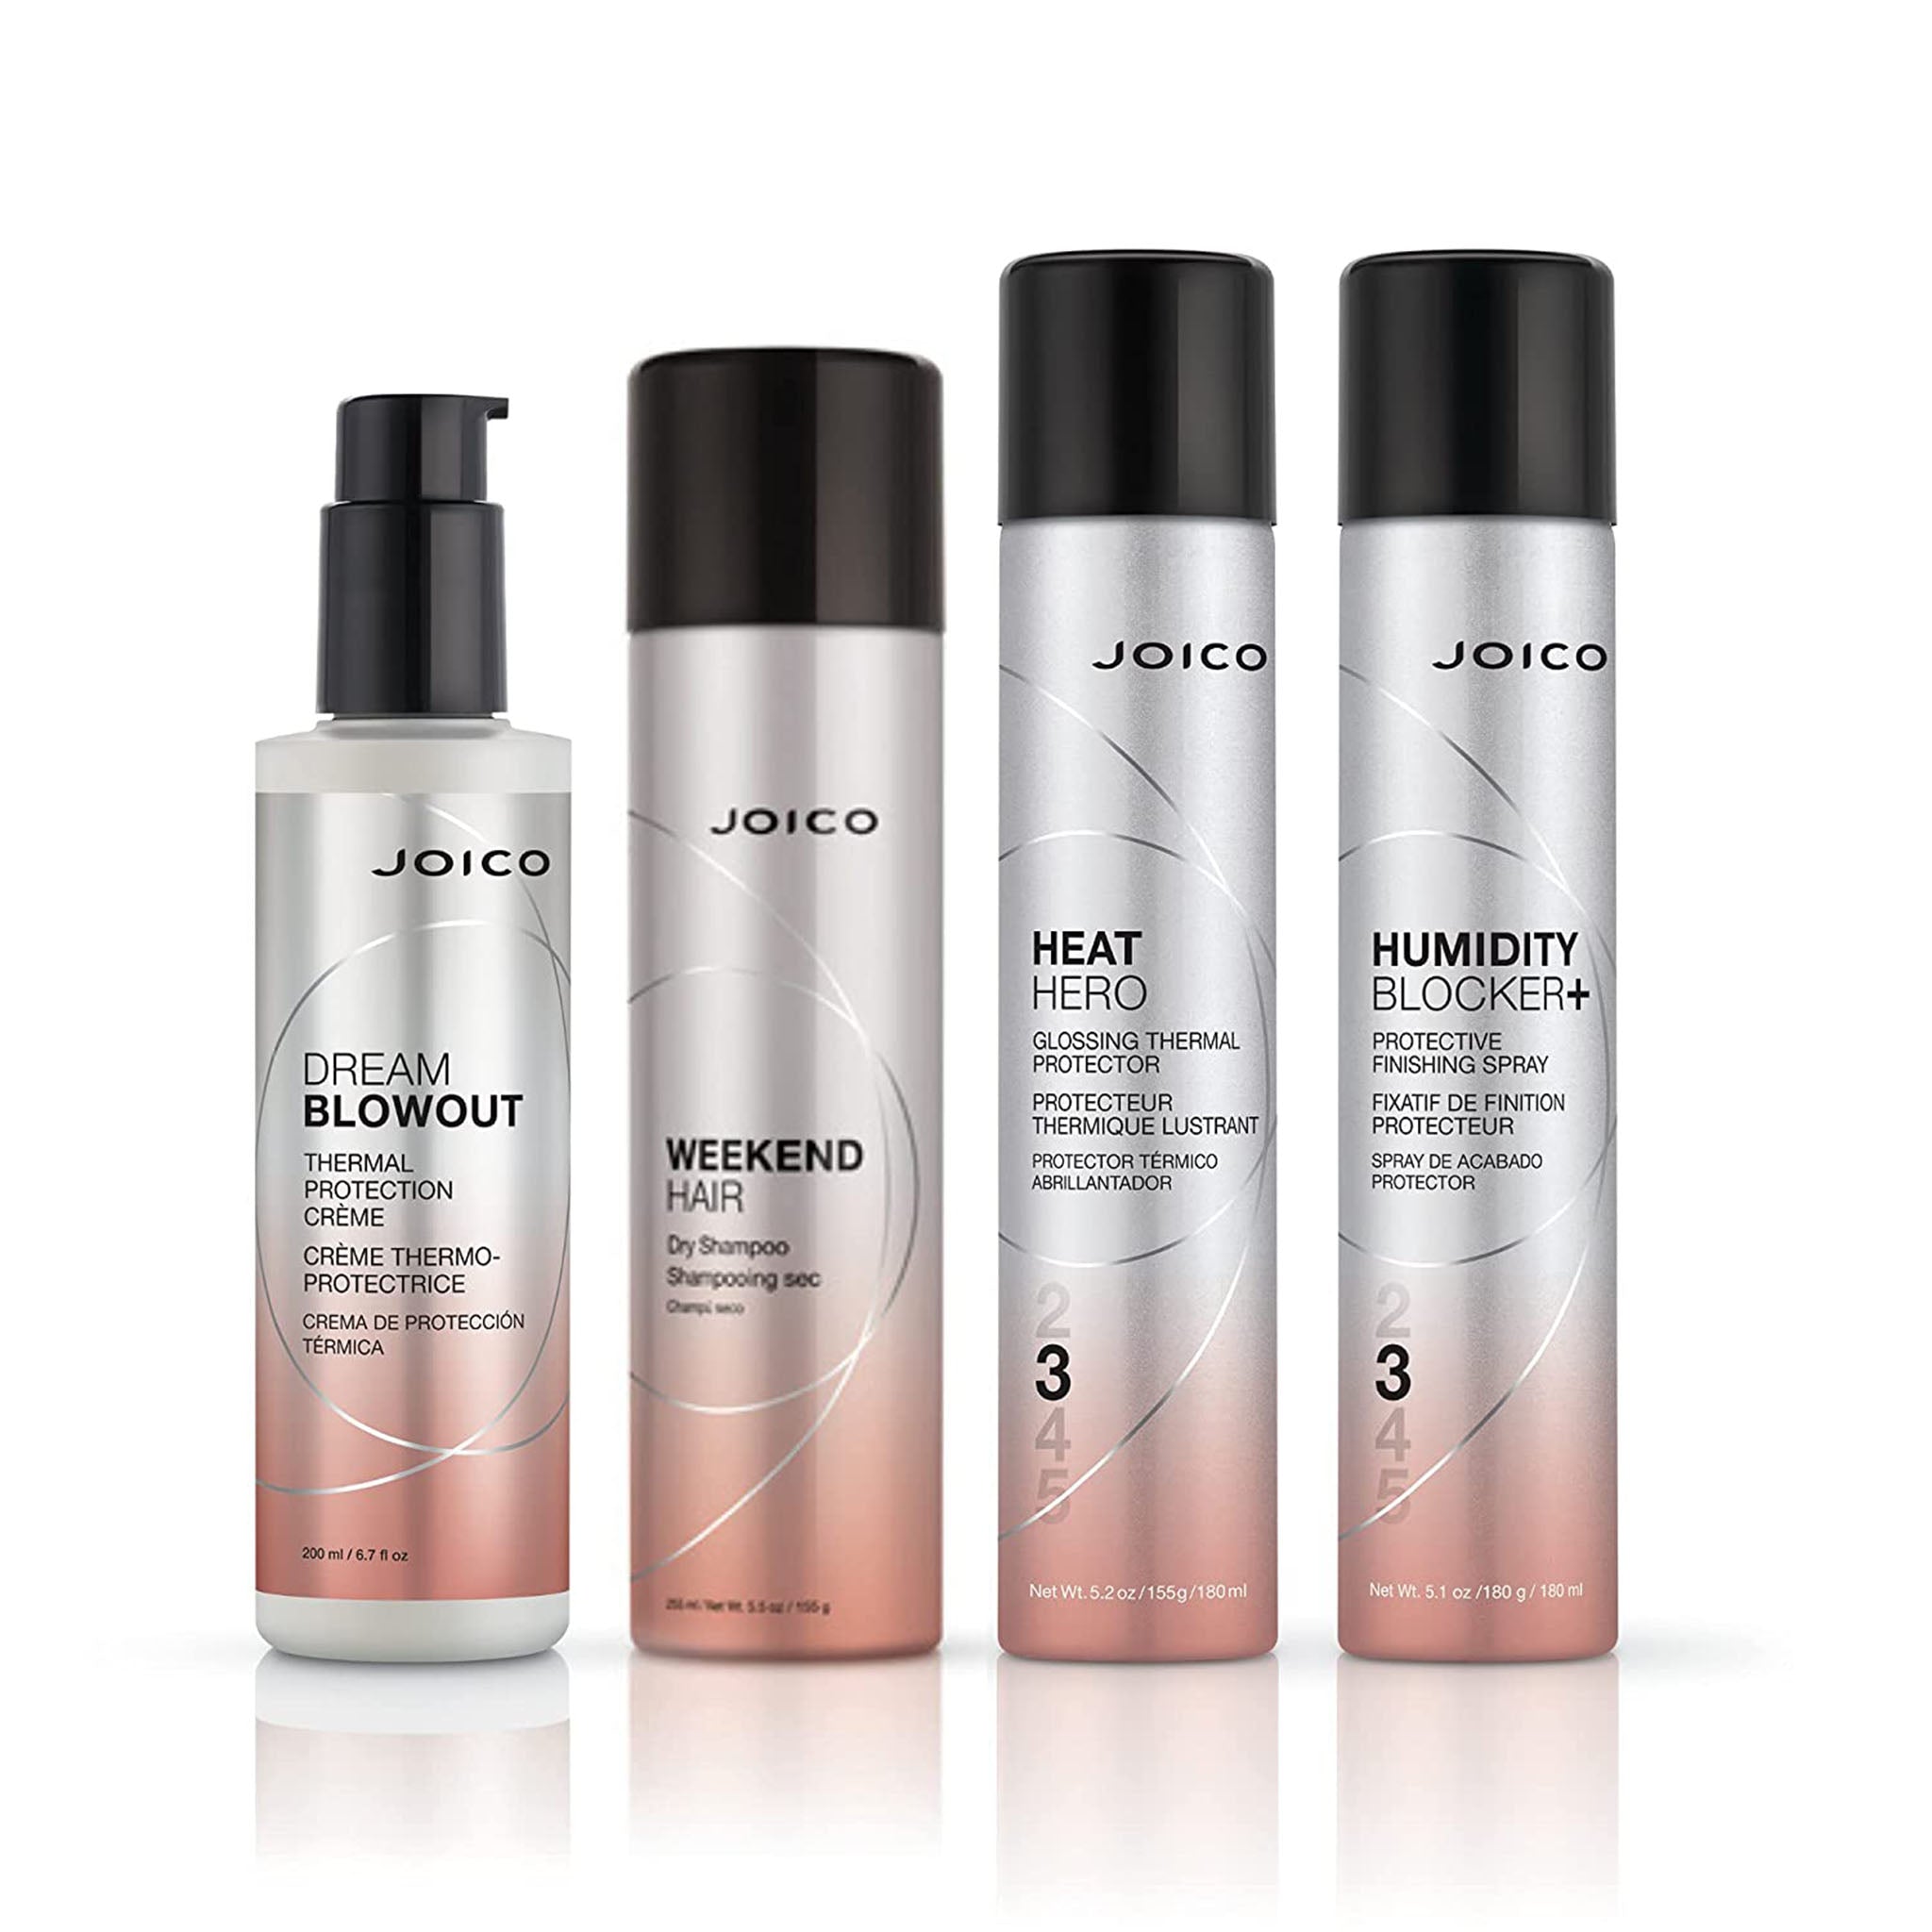 Joico. Creme Thermo-Protectrice Dream Blowout - 200 ml - Concept C. Shop